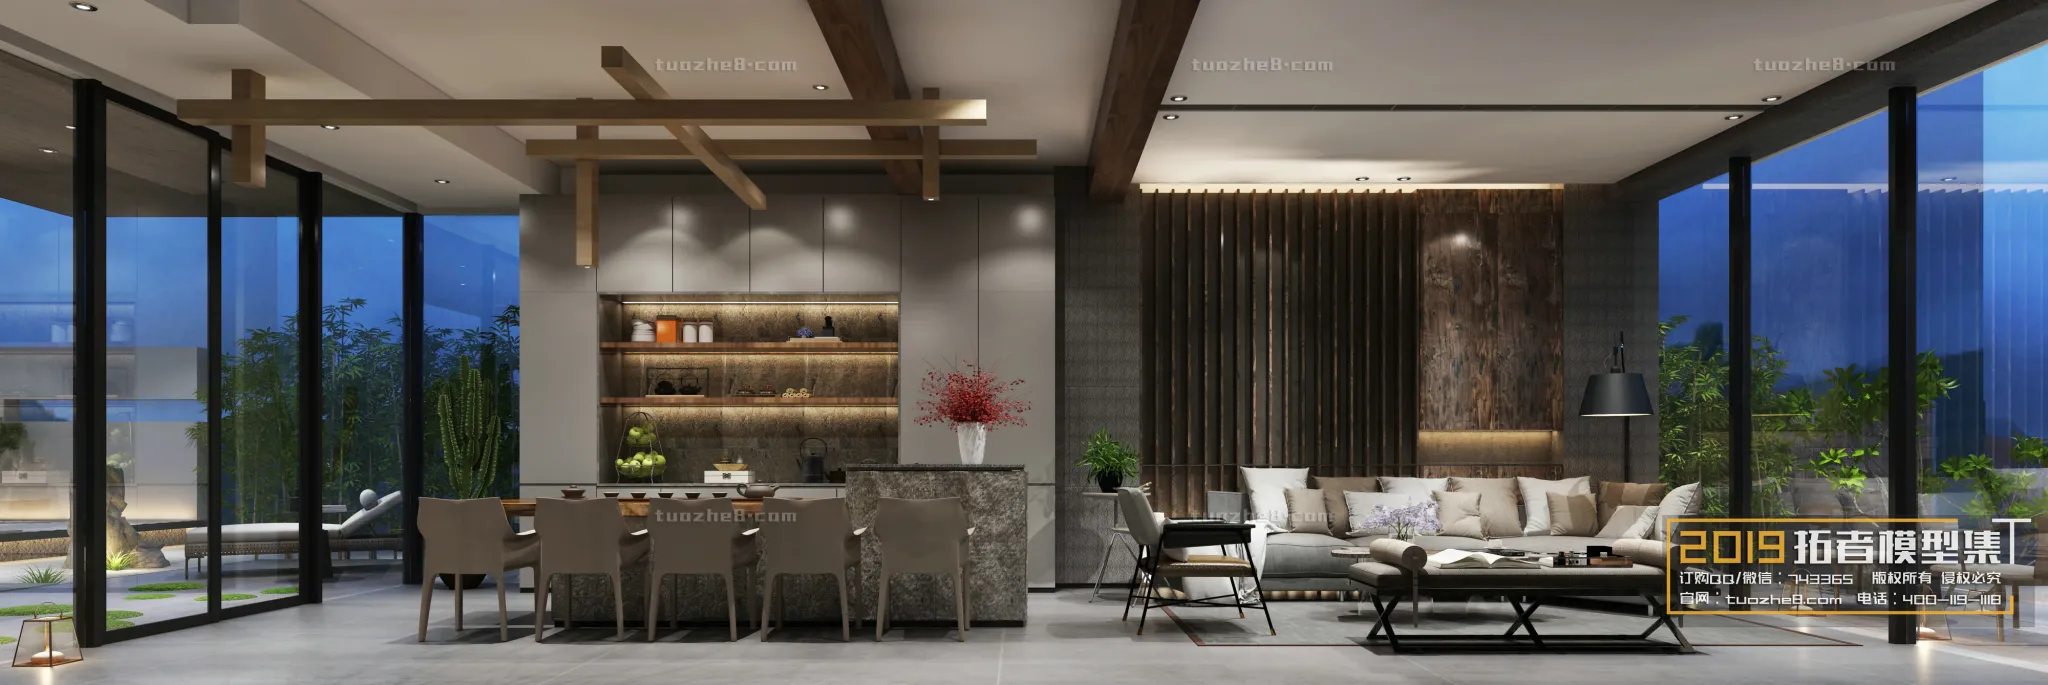 Extension Interior – LINGVING ROOM – CHINESE STYLES – 043